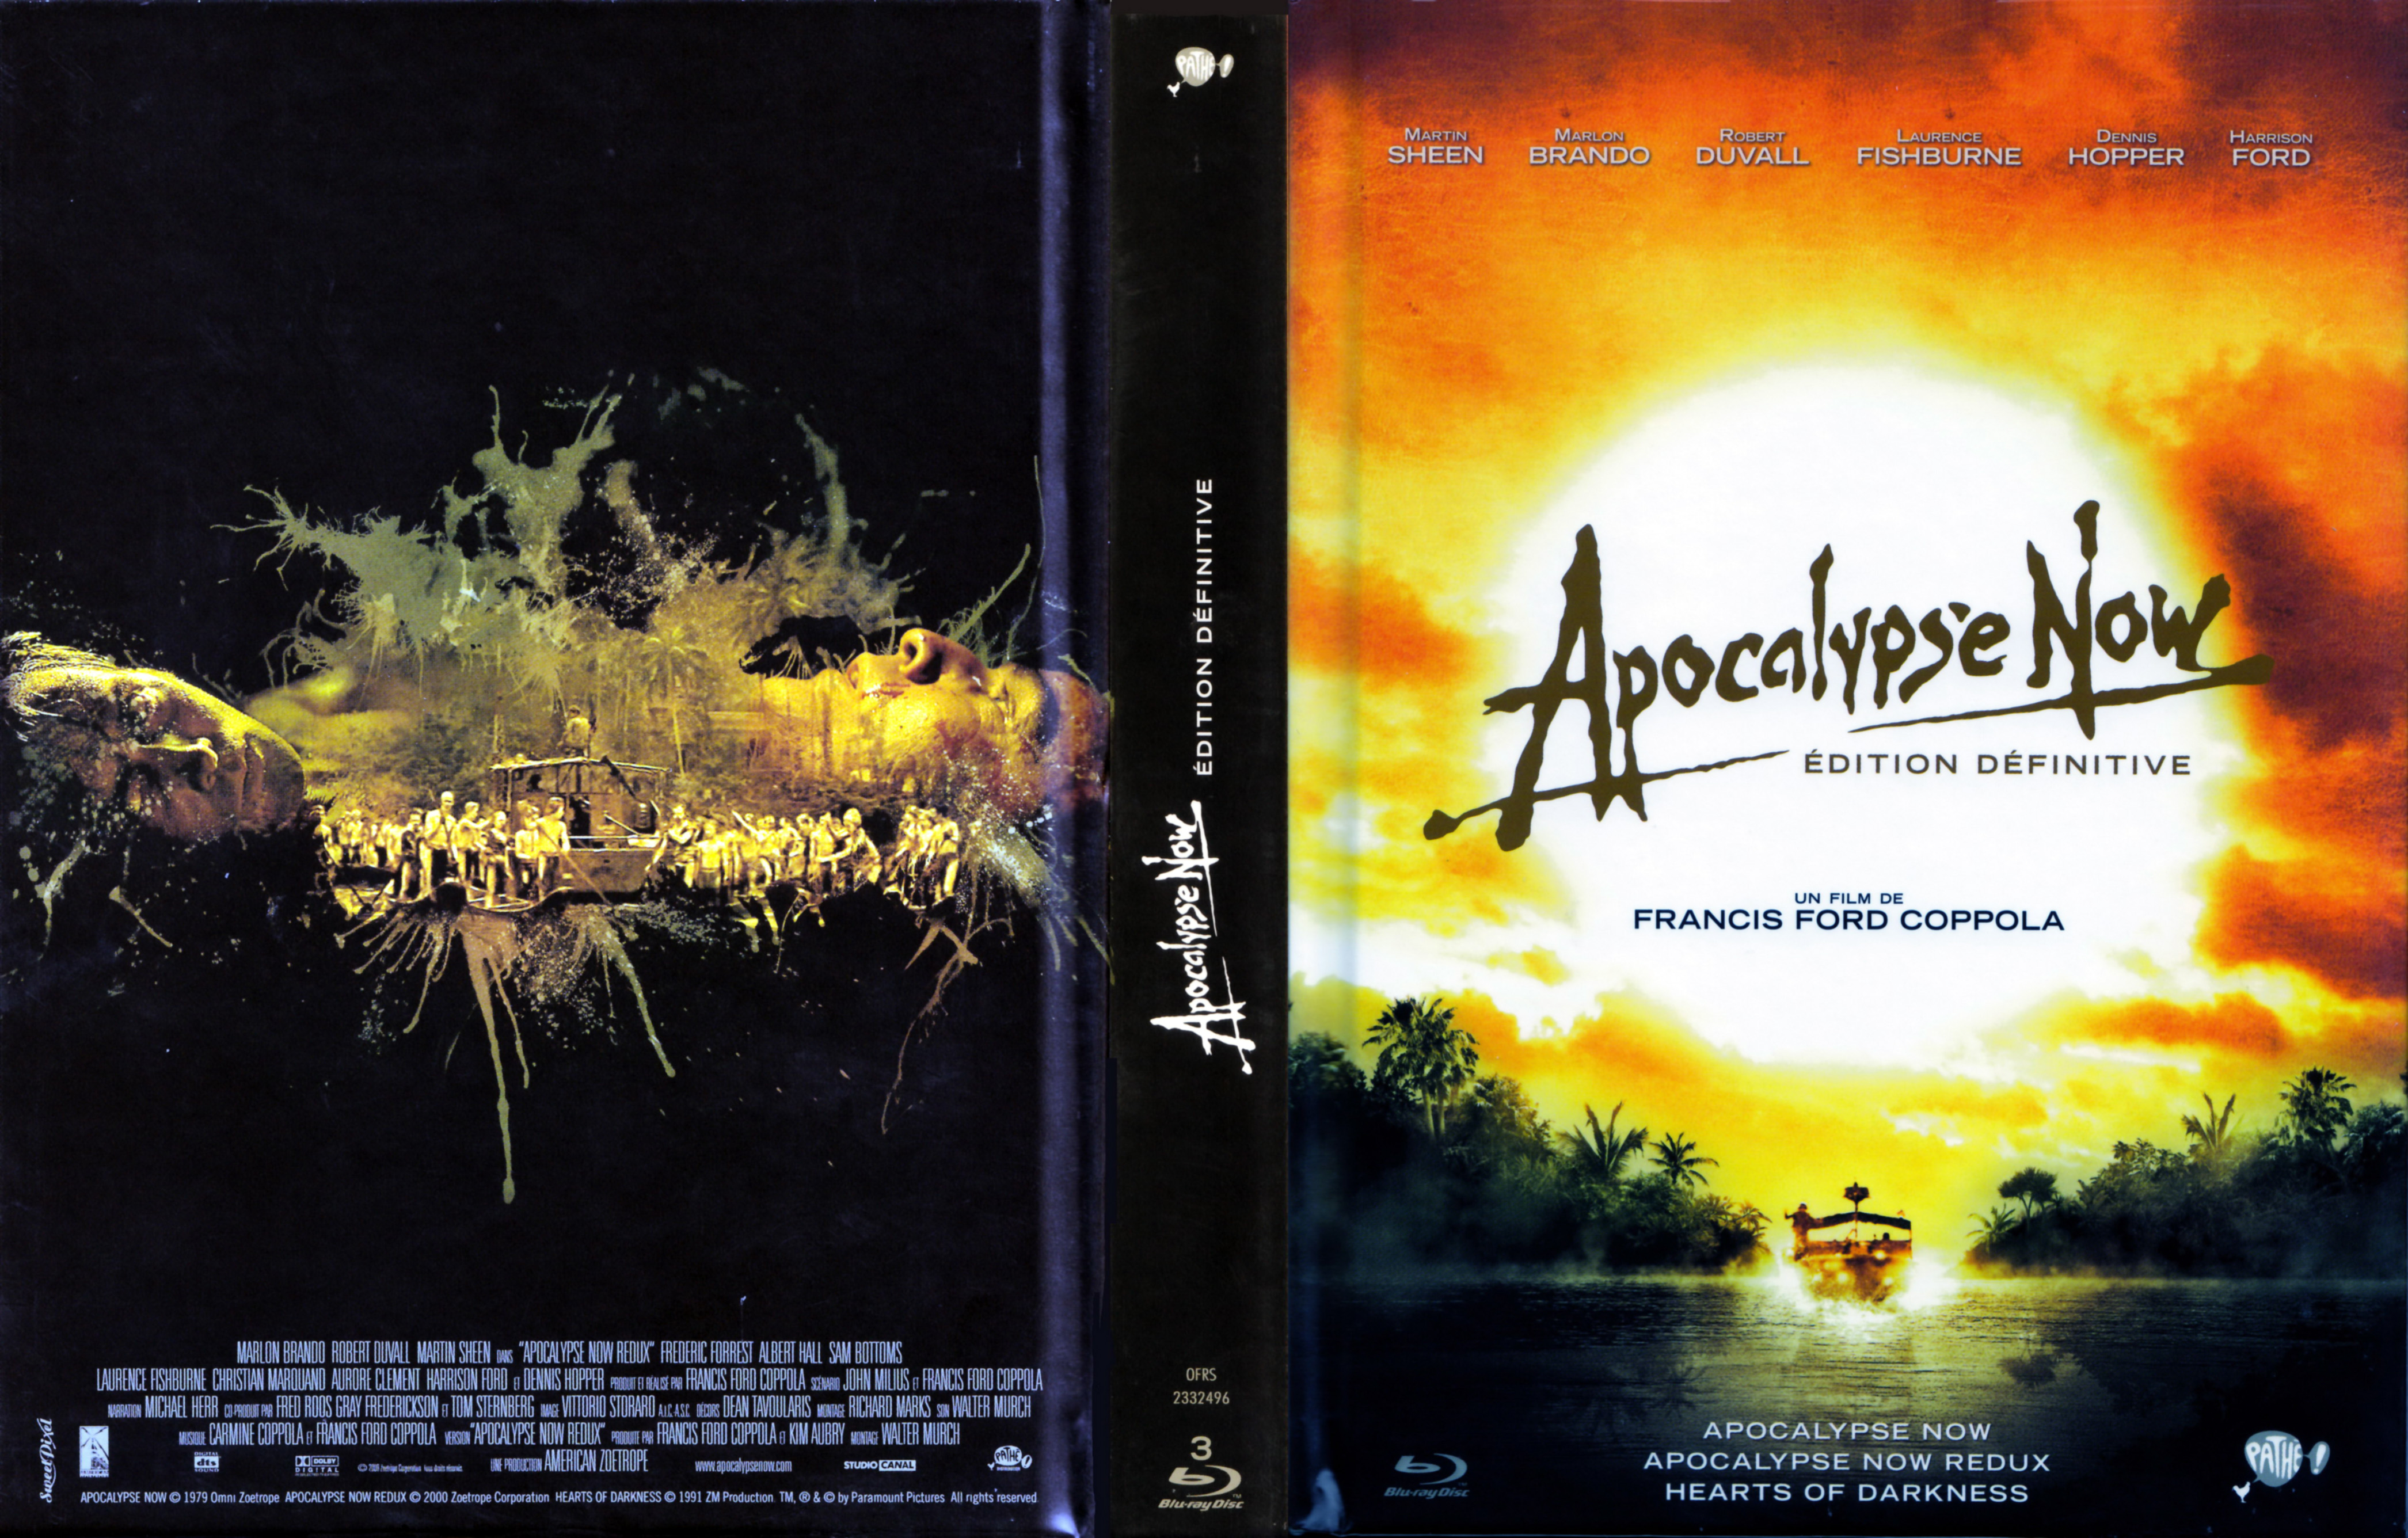 Jaquette DVD Apocalypse now (BLU-RAY)